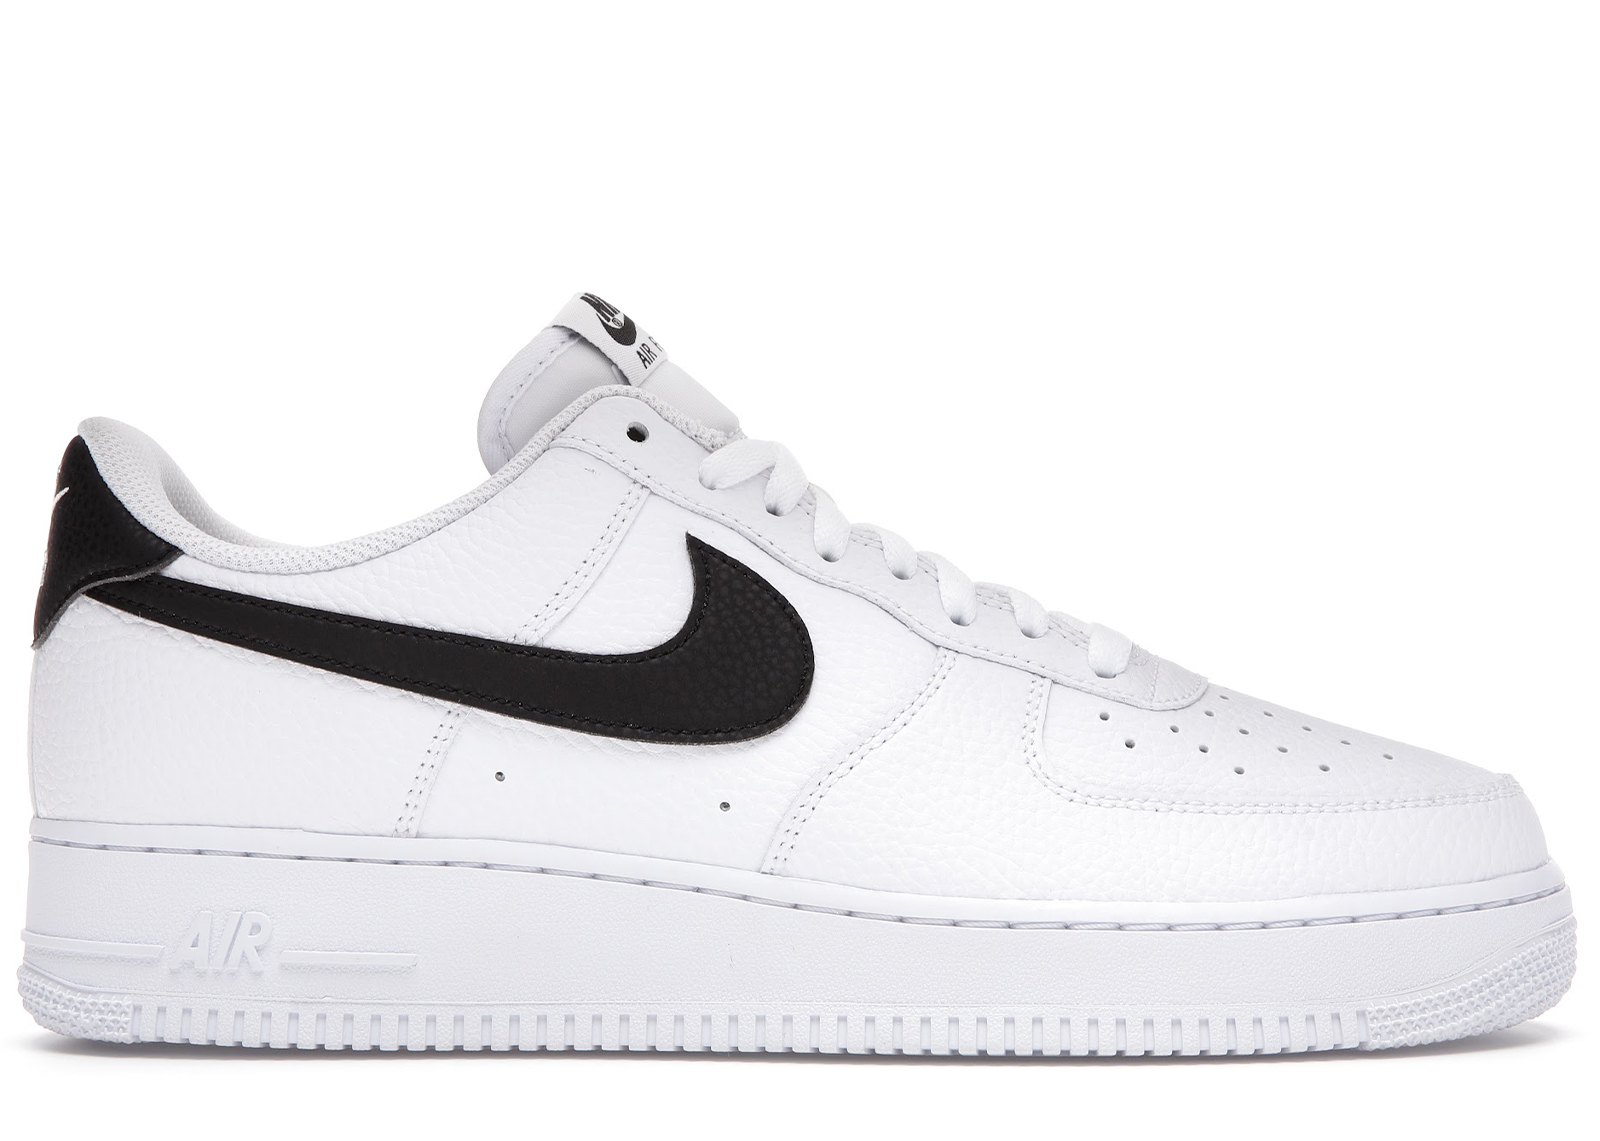 Nike Air Force 1 '07 White Black Pebbled Leather - CT2302-100